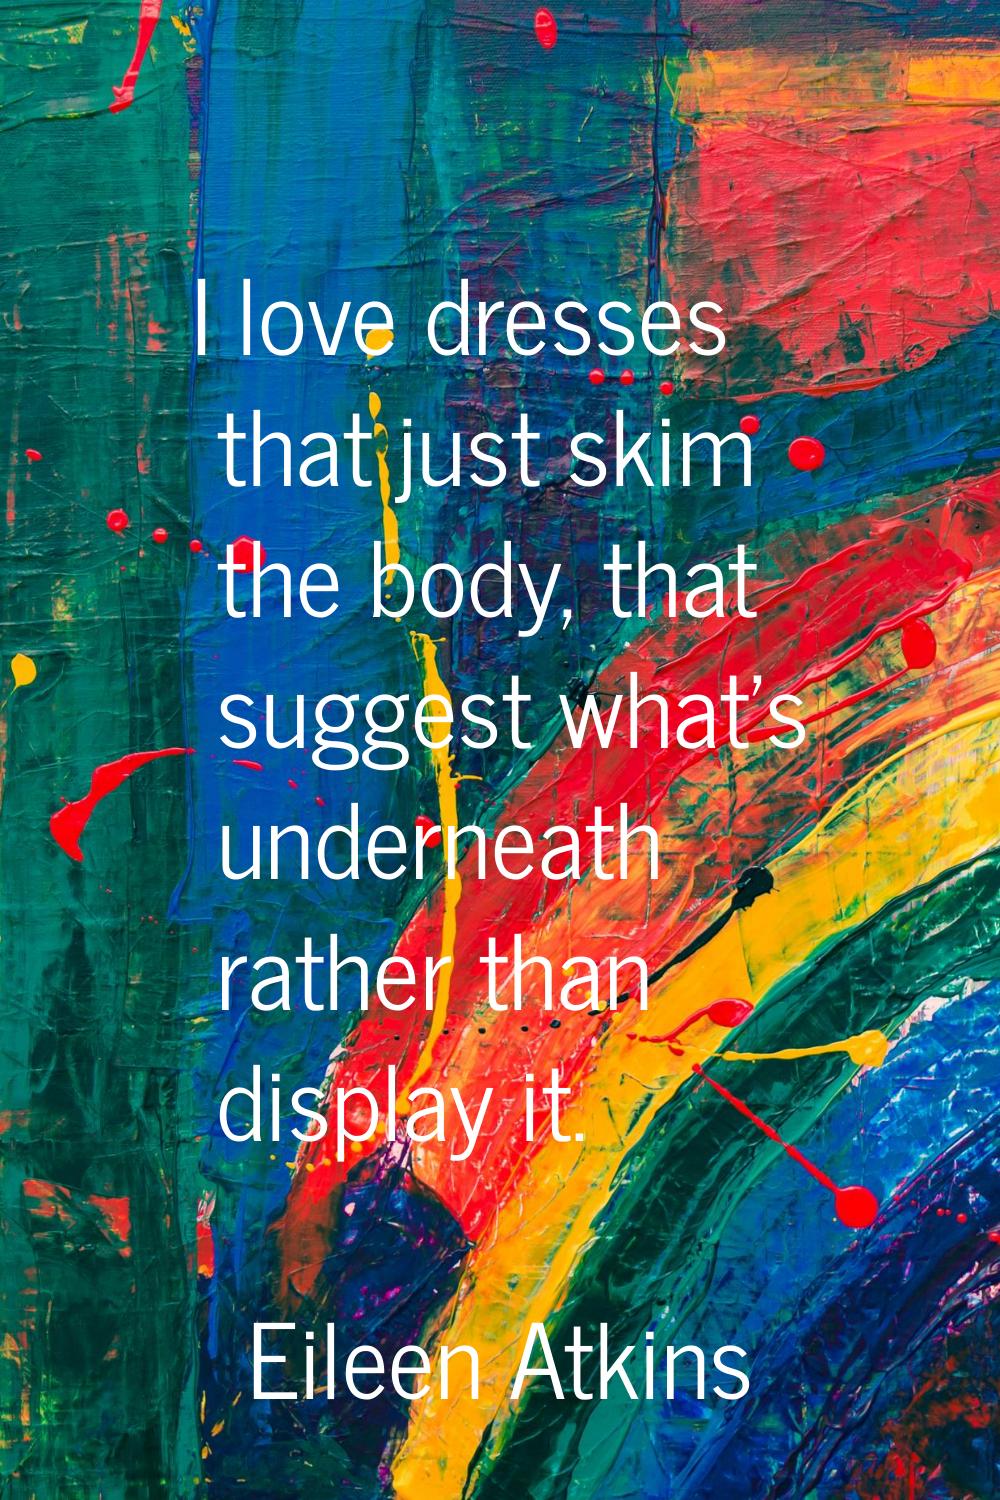 I love dresses that just skim the body, that suggest what's underneath rather than display it.